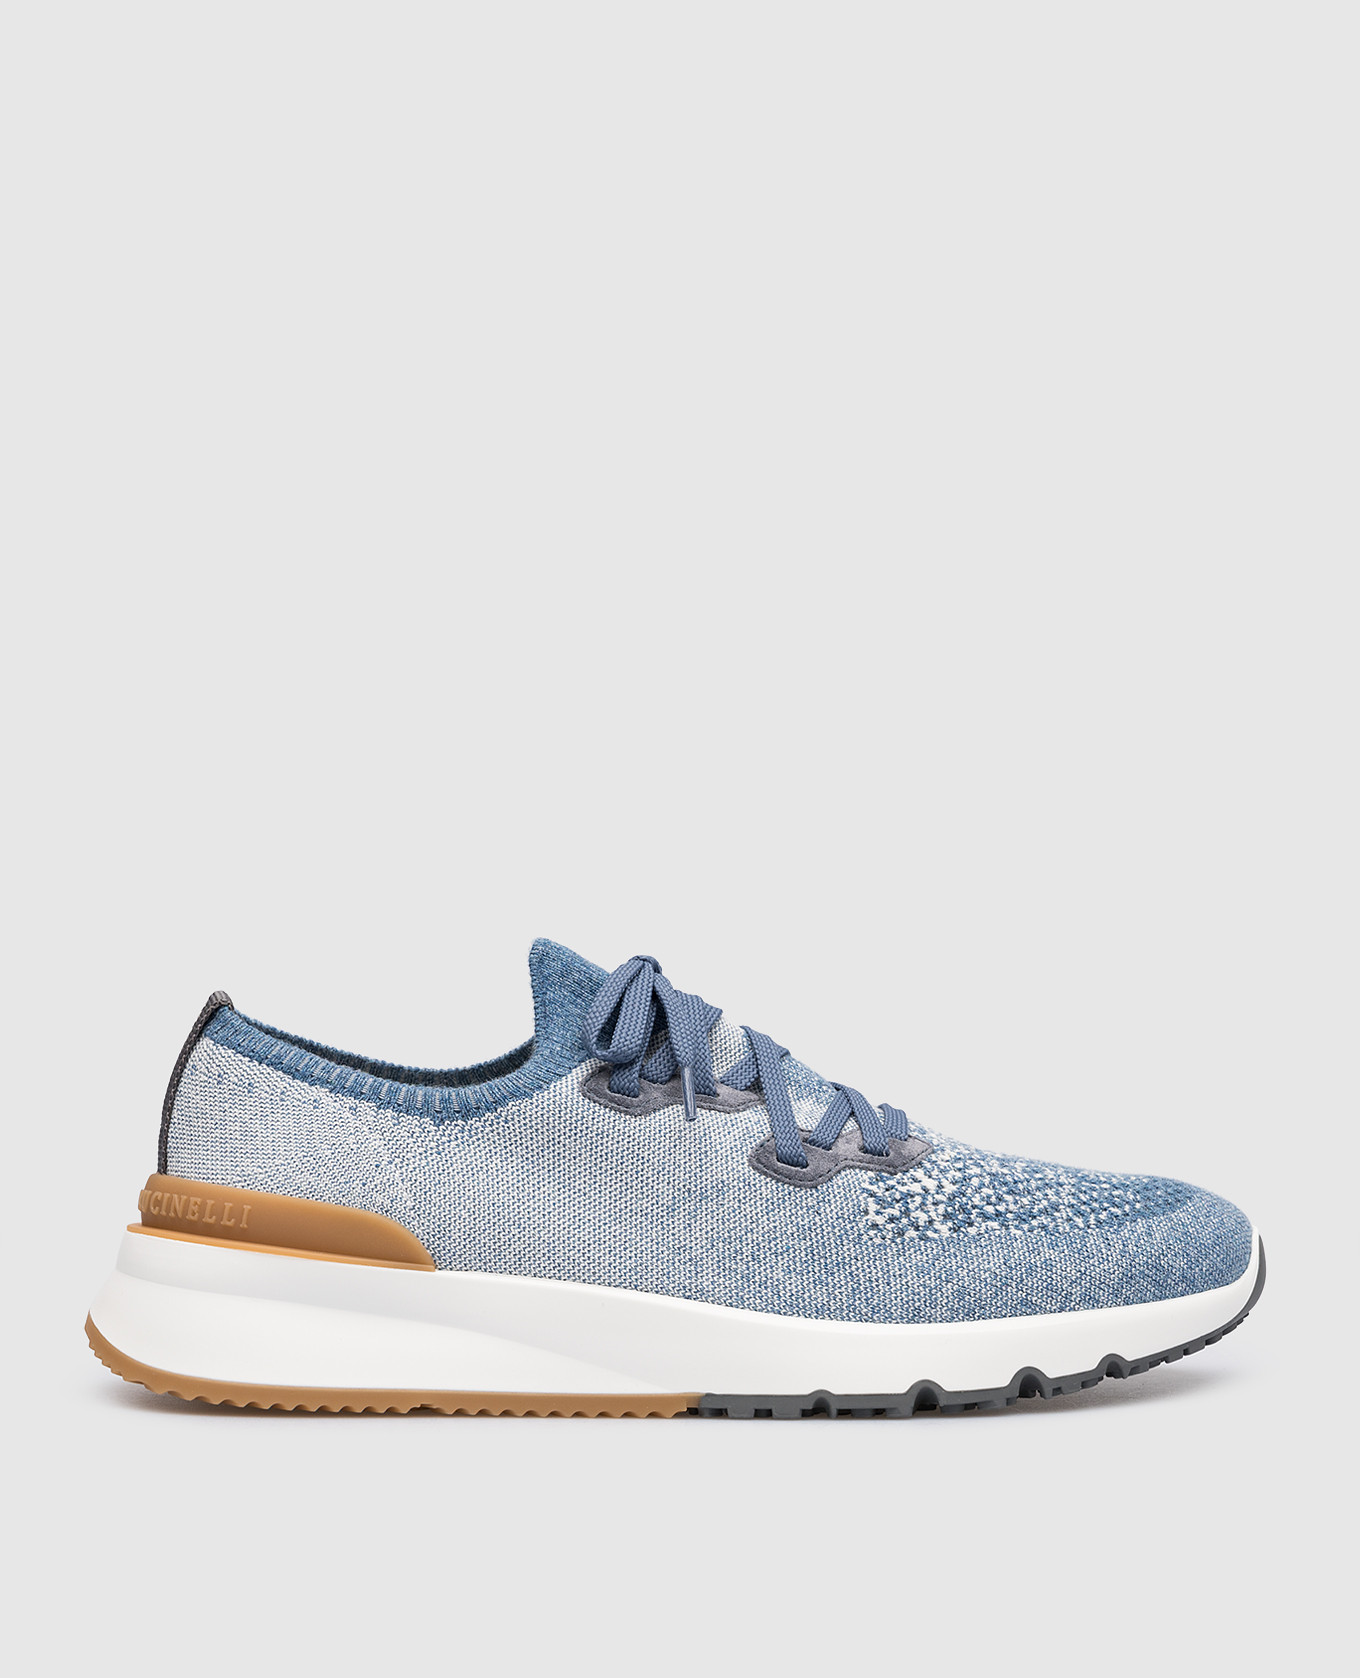 Blue sneakers with a textured logo